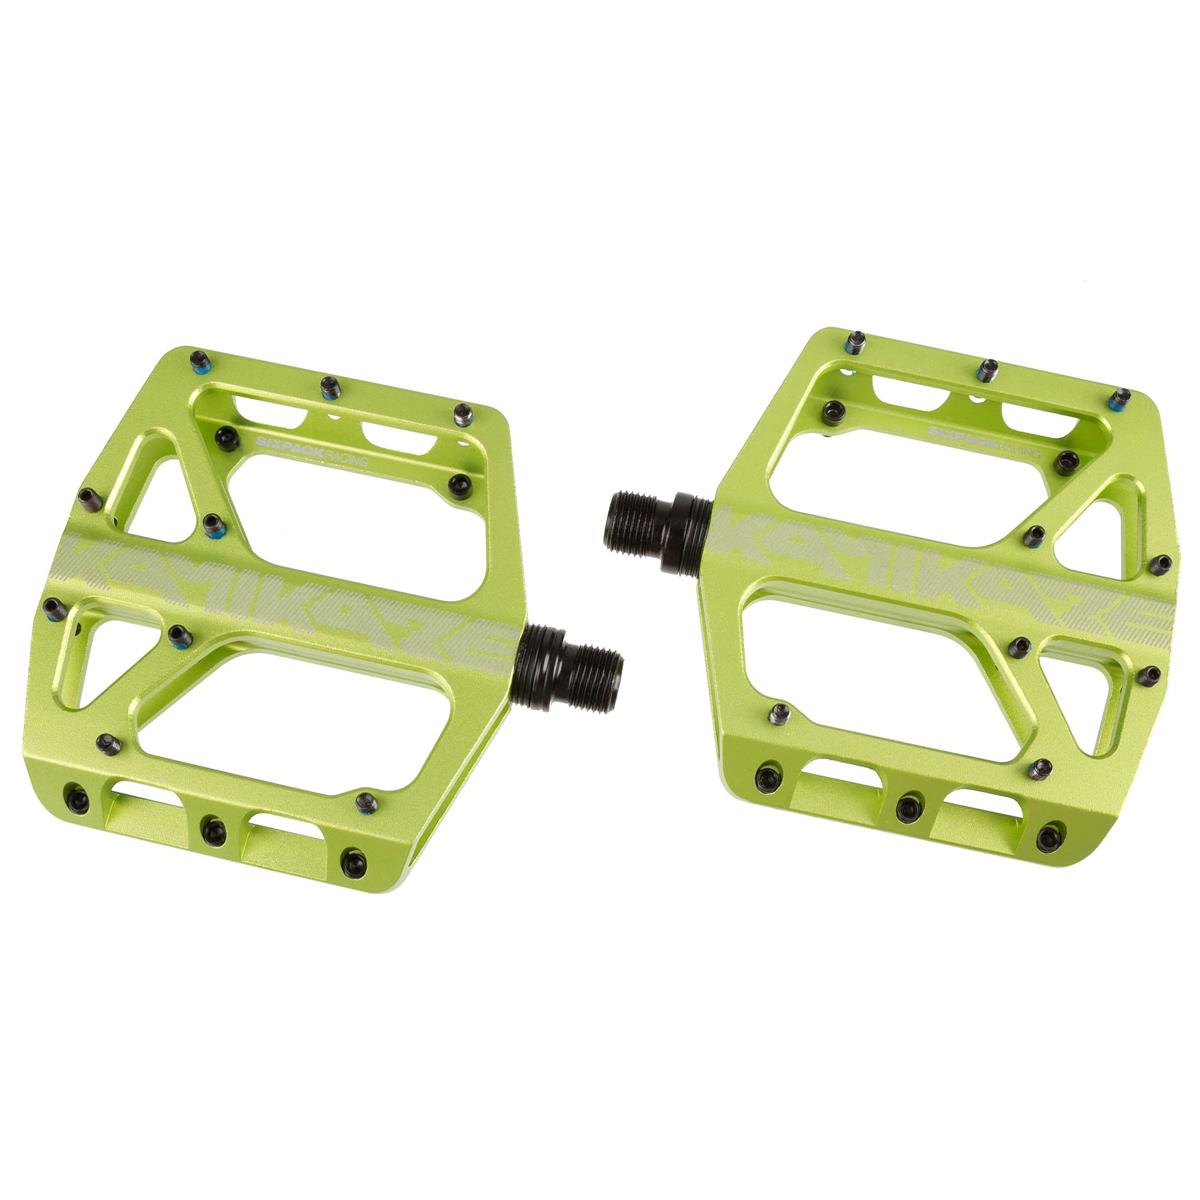 Sixpack Pedals Kamikaze 2.0 Electric Green, 110x110 mm, 36 M4 Pins, 1 Pair